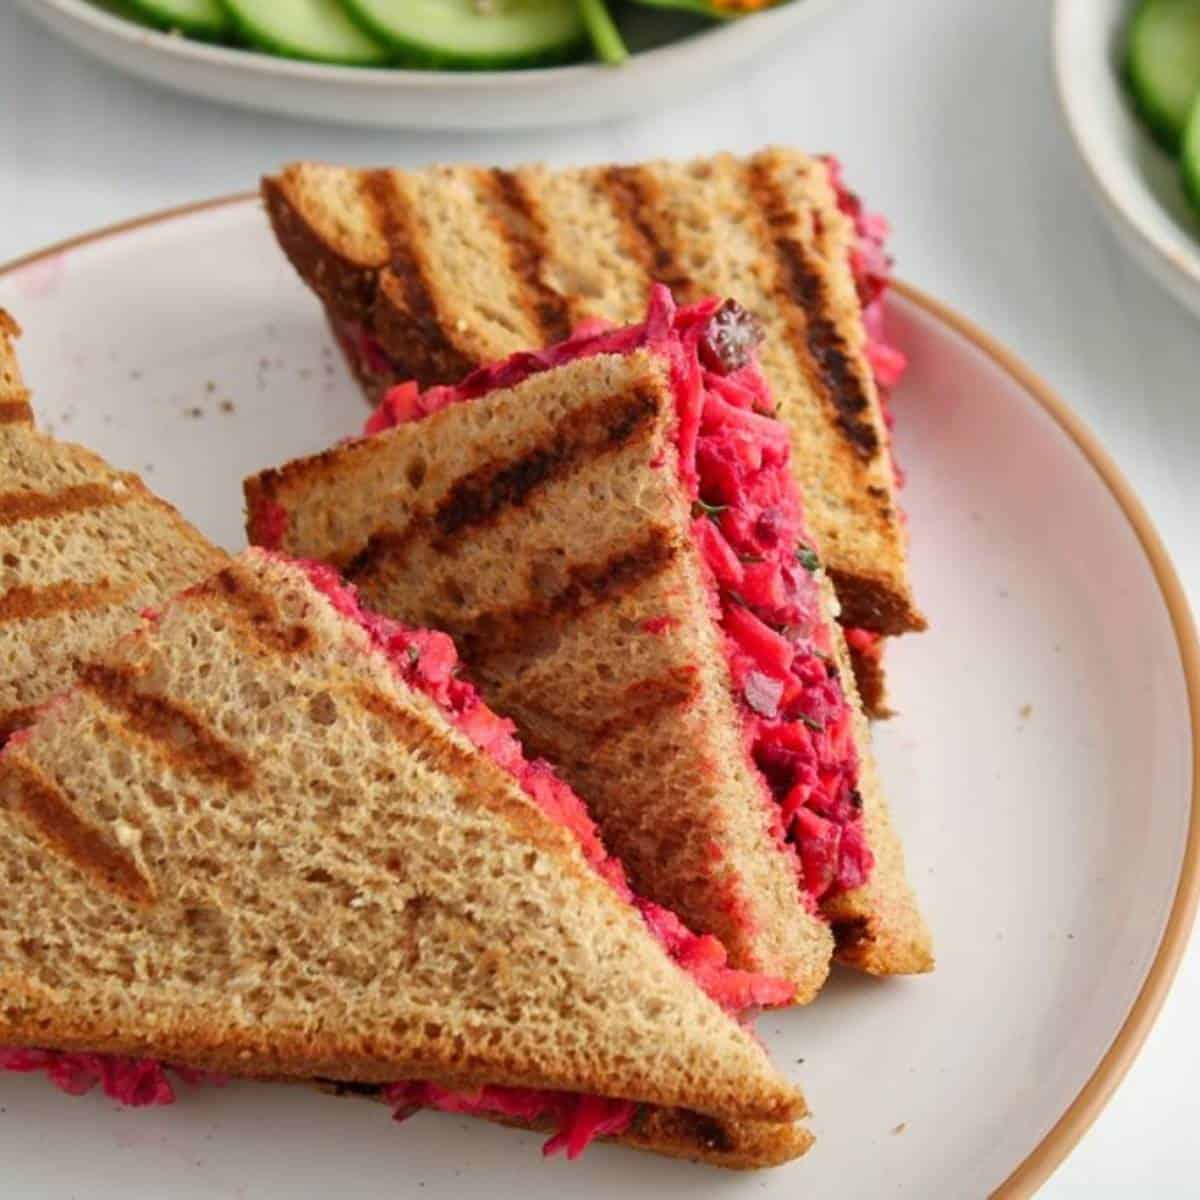 triangle sandwiches filled with bright pink beetroot and pickles.